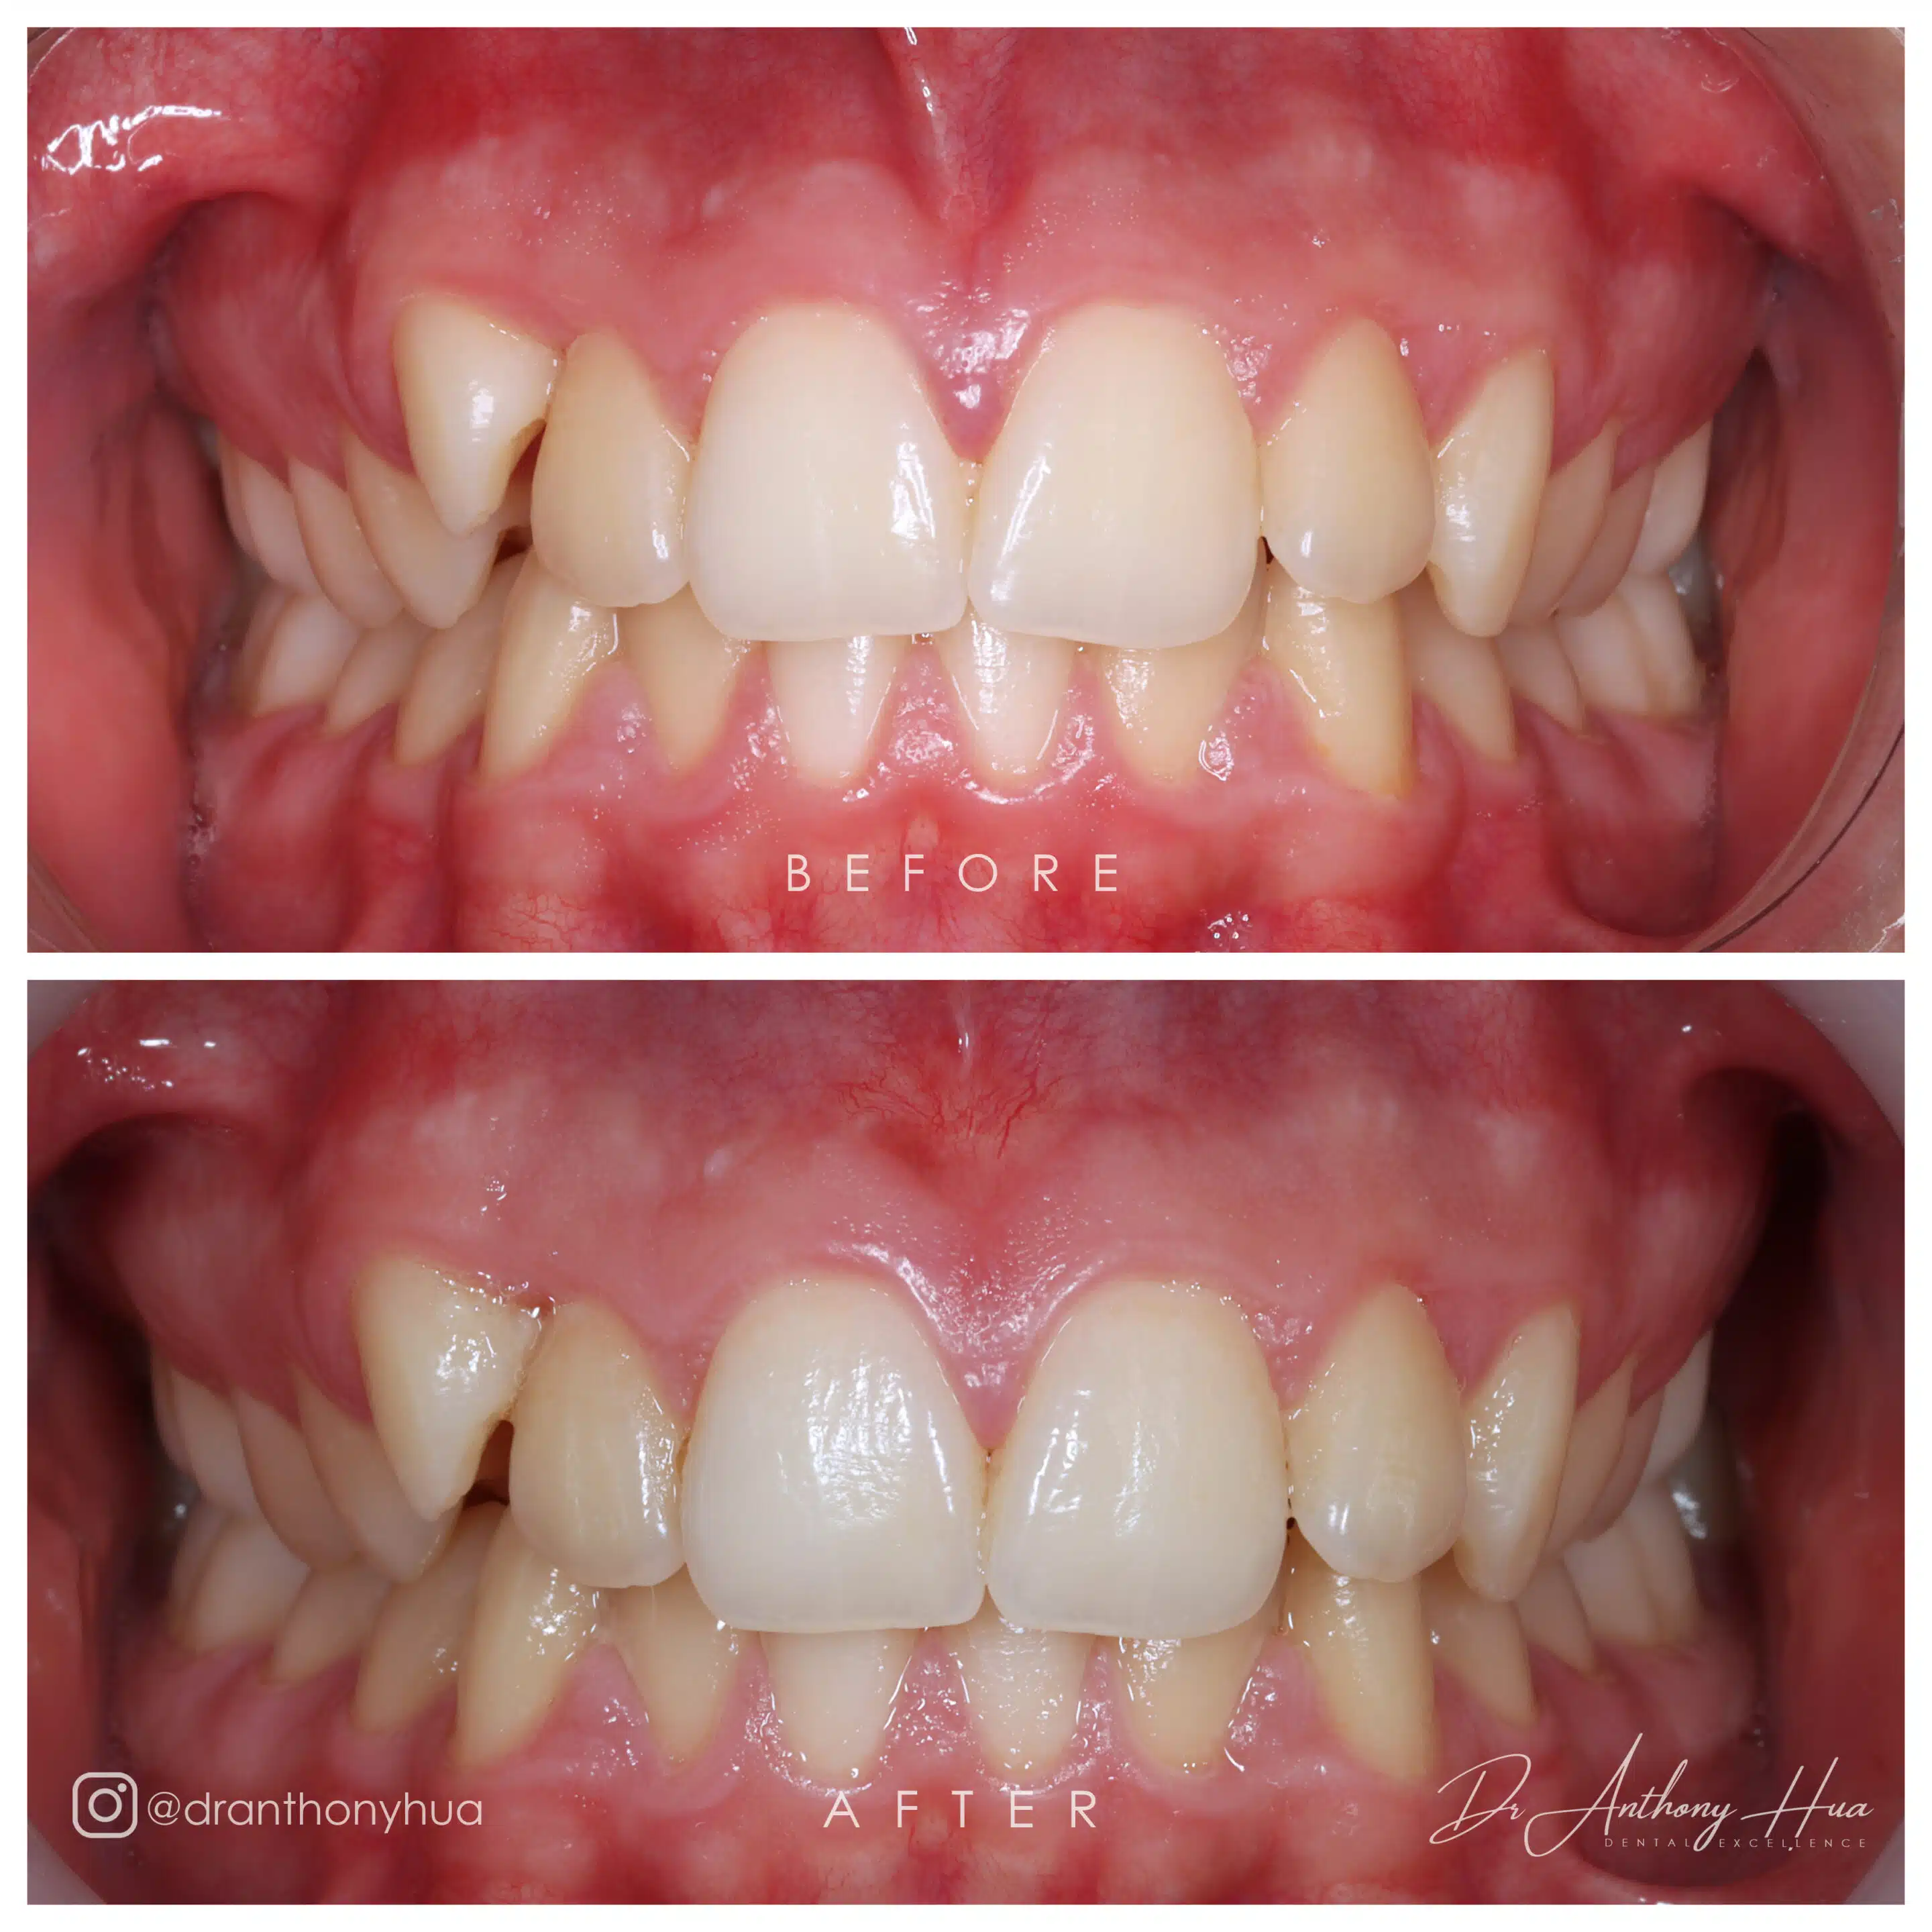 Laser Frenectomy before and after procedure at burleigh dental studio